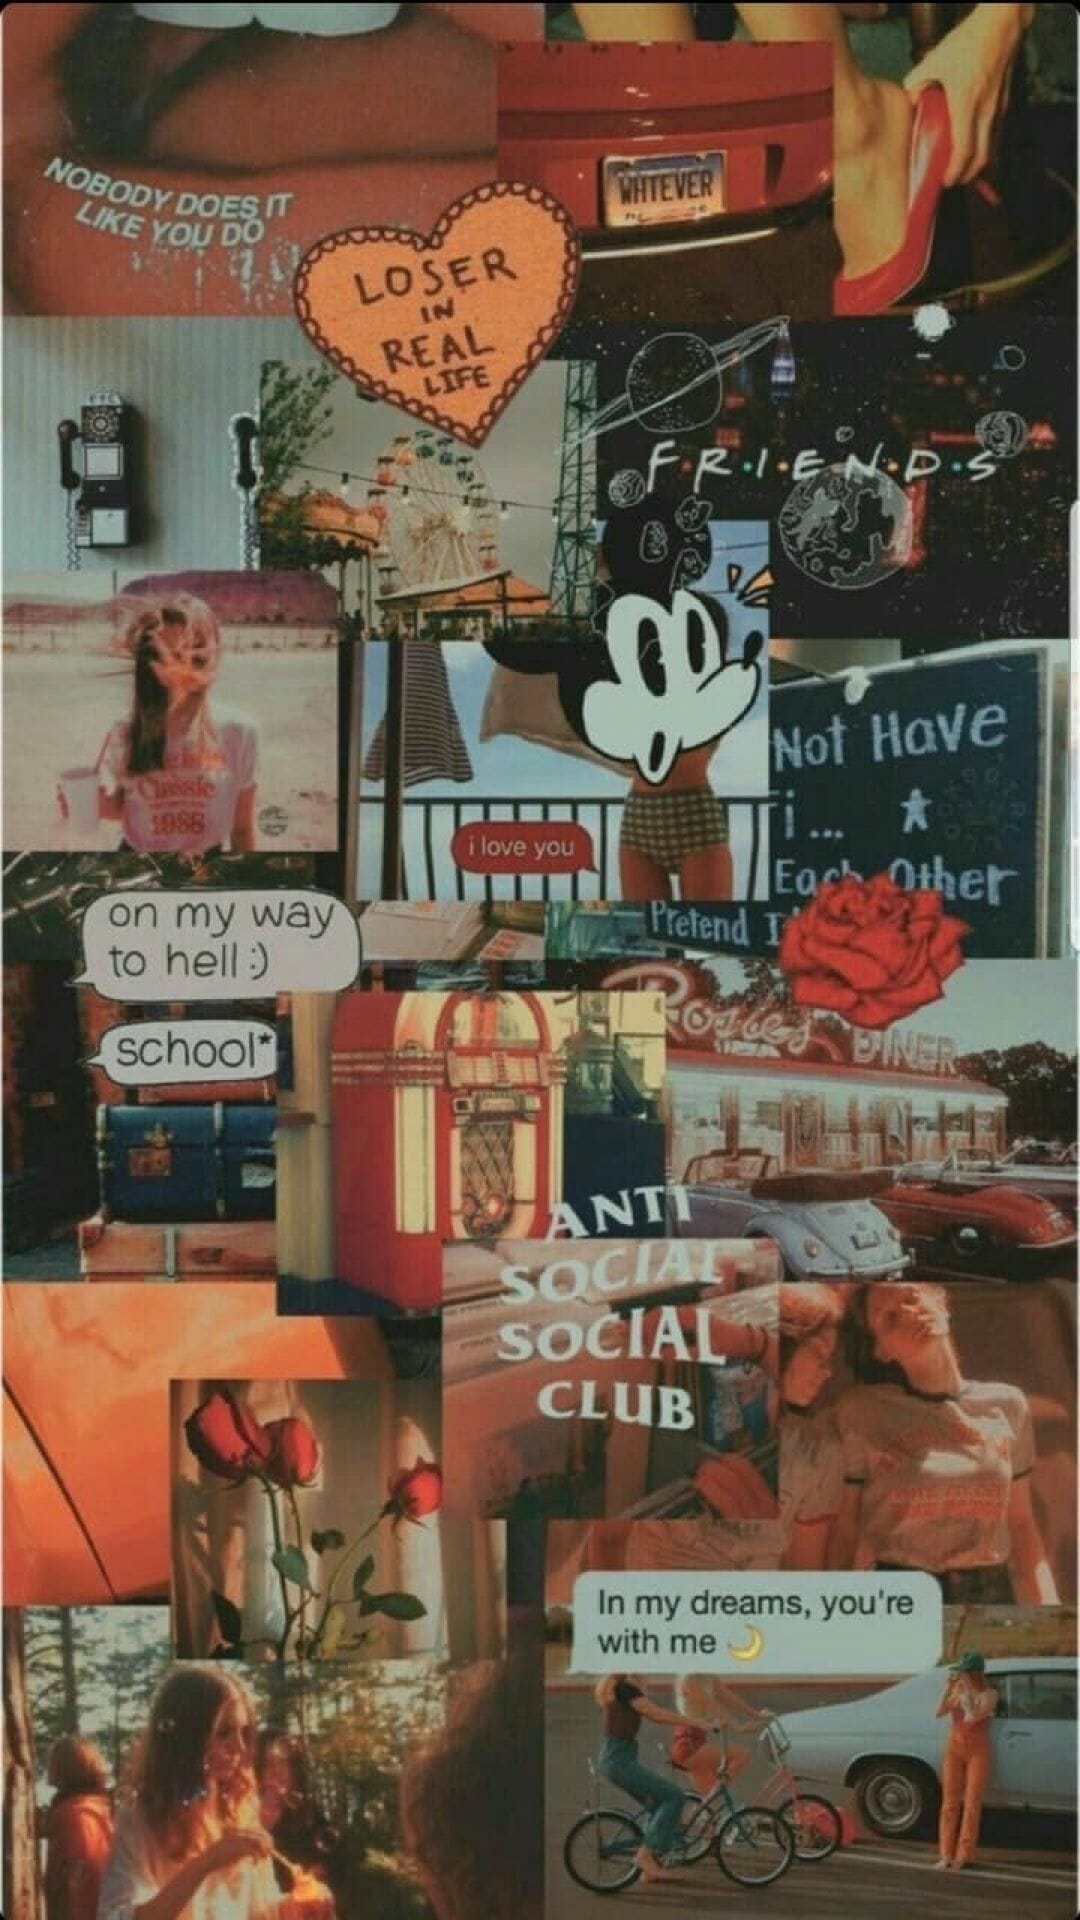 Aesthetic collage background with a red rose, mickey mouse, and anti social social club - Retro, collage, 90s, vintage fall, vintage, 80s